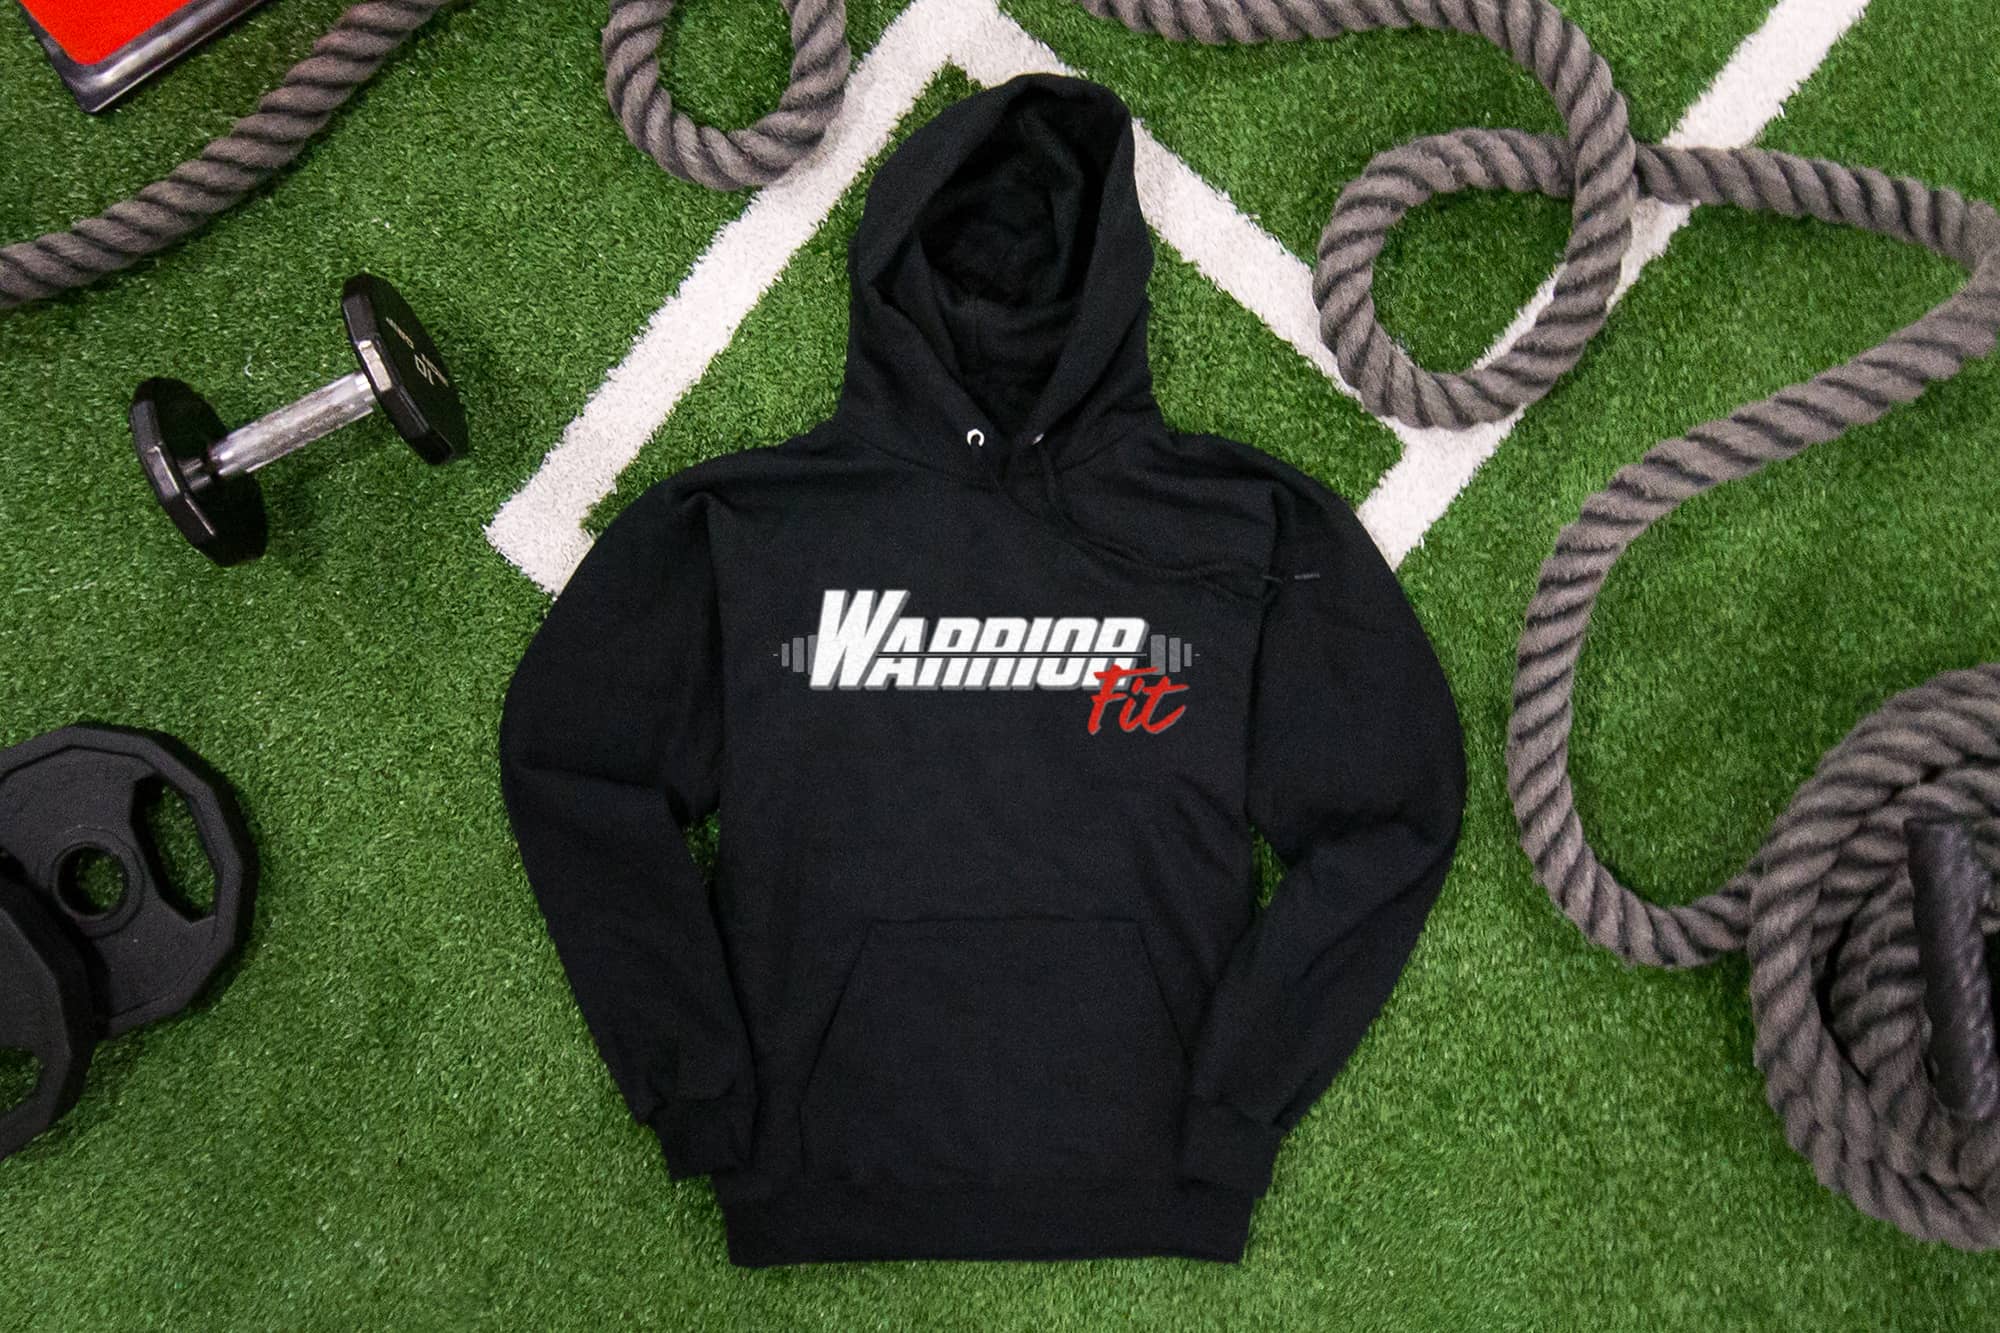 Flatlay of on fake grass of a hoodie with a logo for a gym that reads "Warrior Fit". Weight and other exercise equipment are laying around.